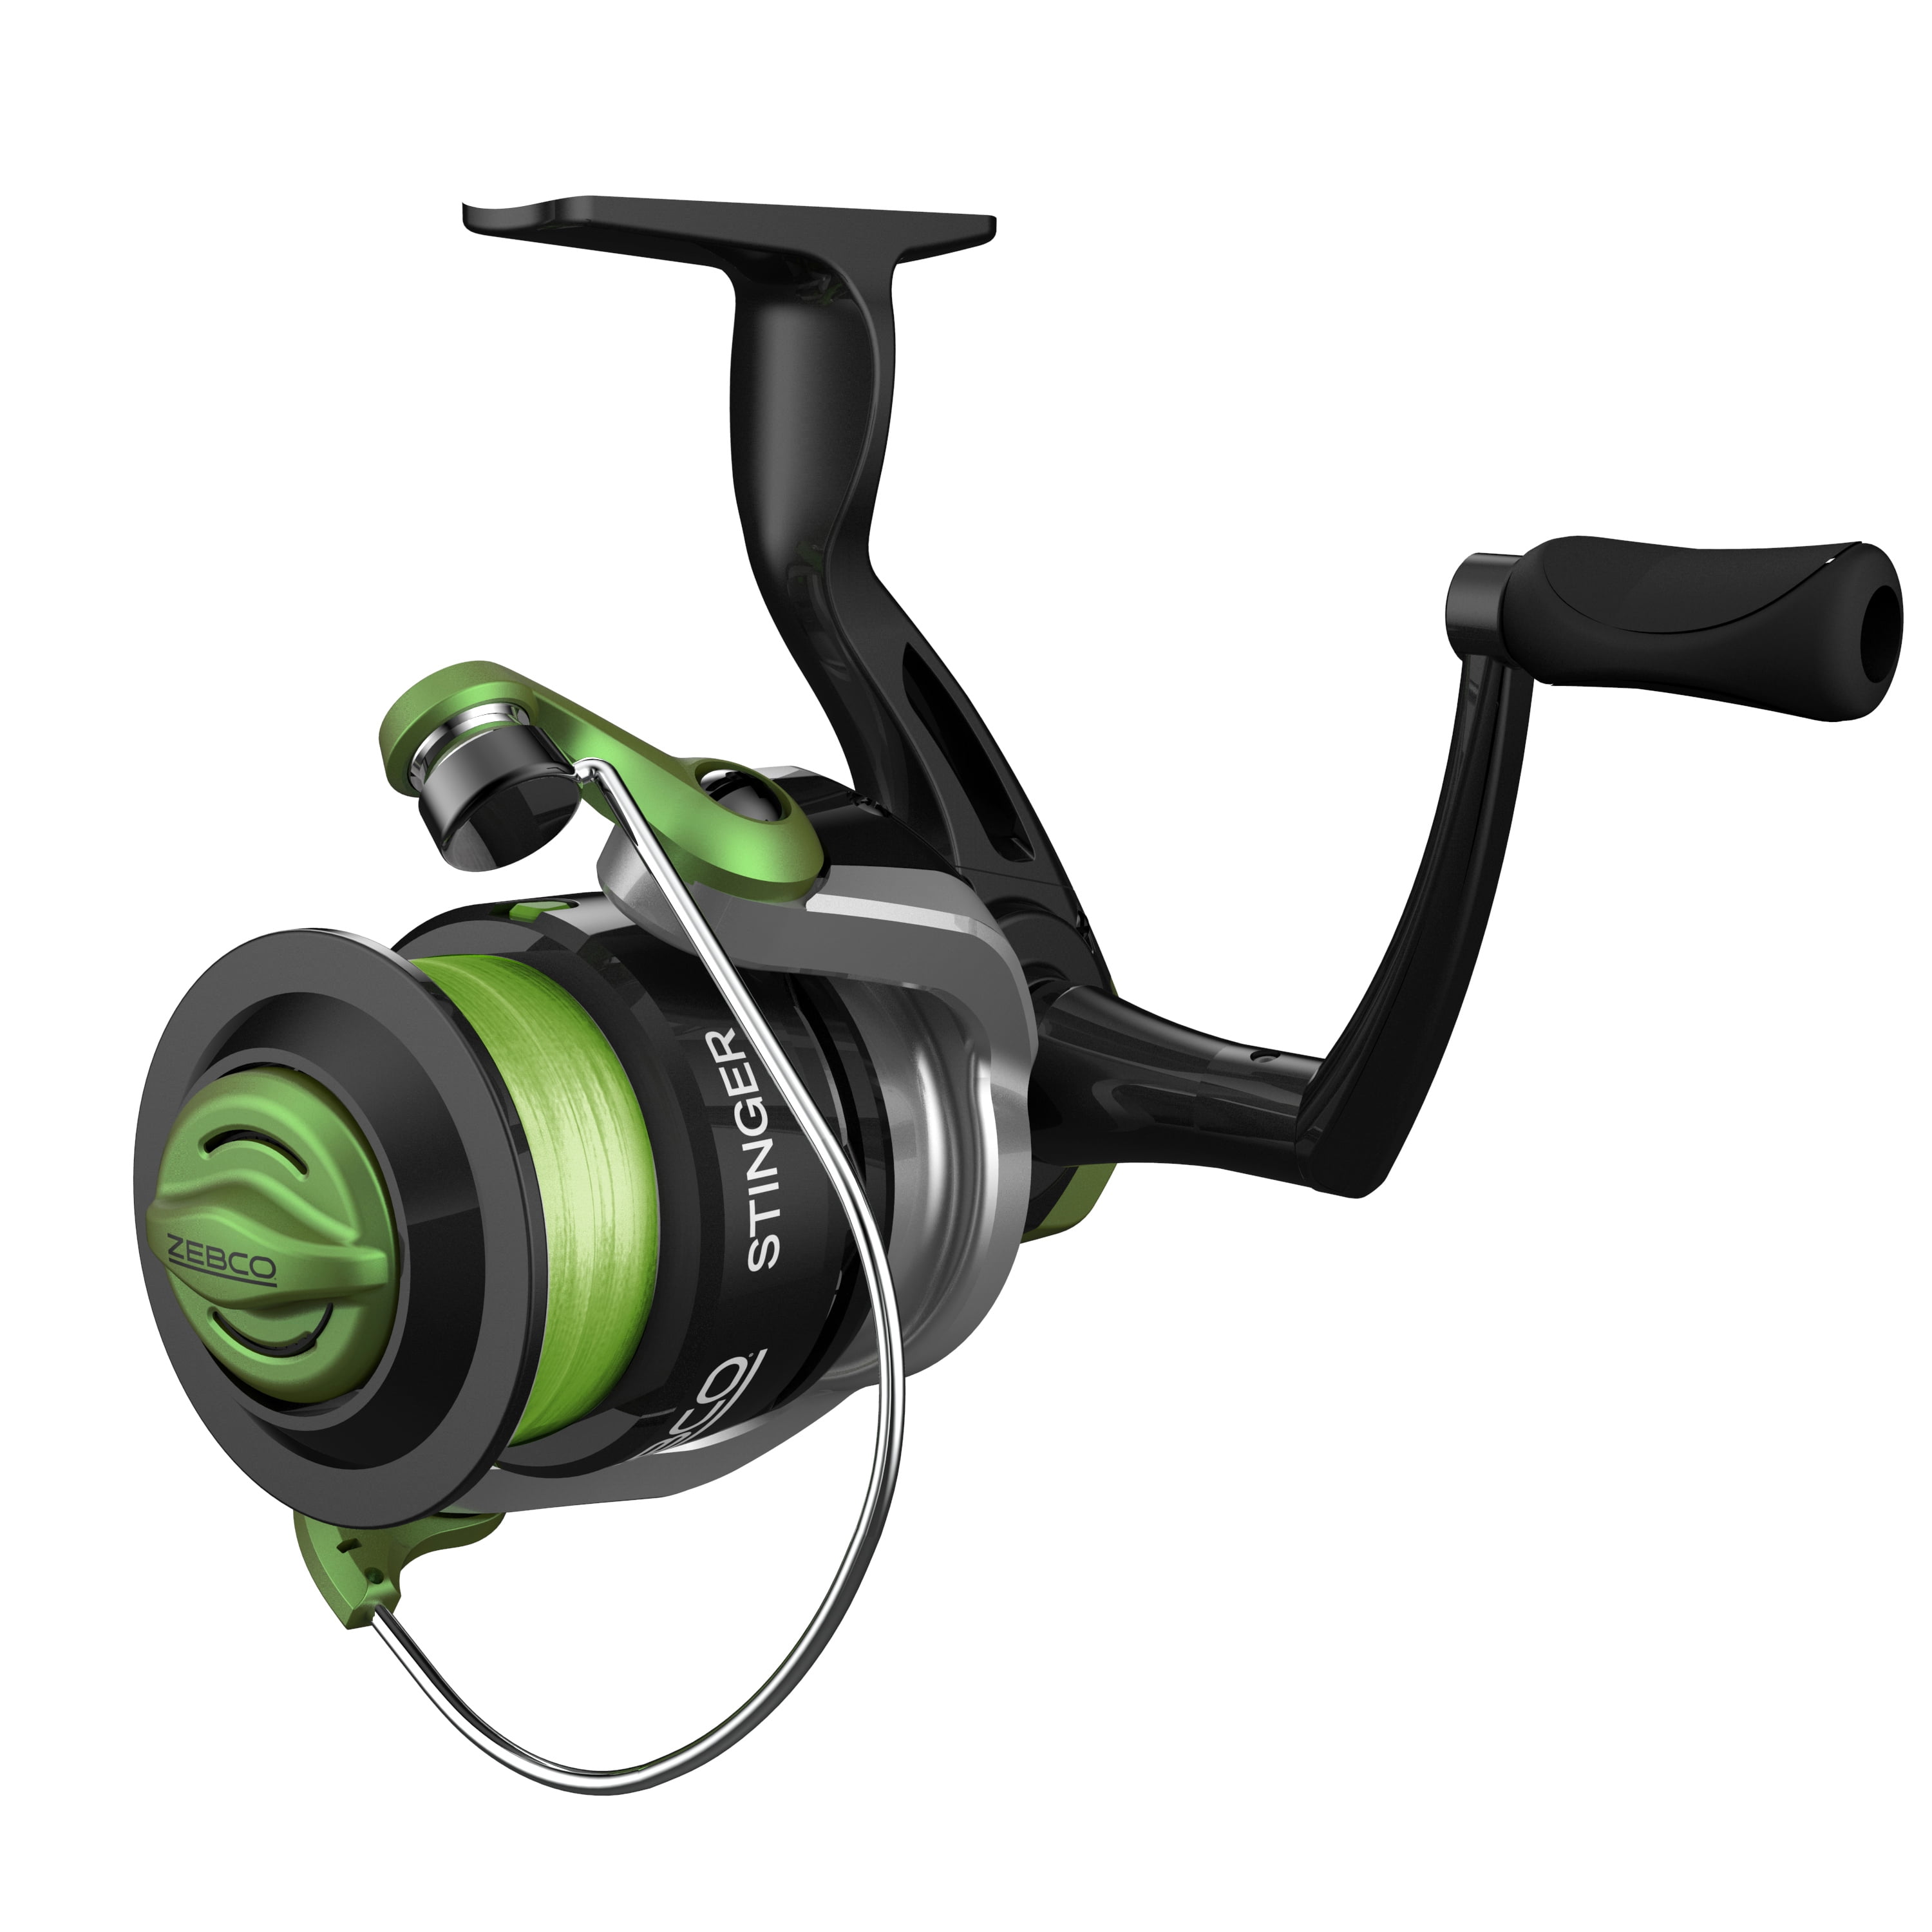 Zebco Stinger Spinning Fishing Reel, Size 30 Changeable Right- or Left-Hand  Retrieve, All-Metal Gears, Ball Bearing System, Pre-Spooled with 10-Pound  Zebco Line, Silver/Black 